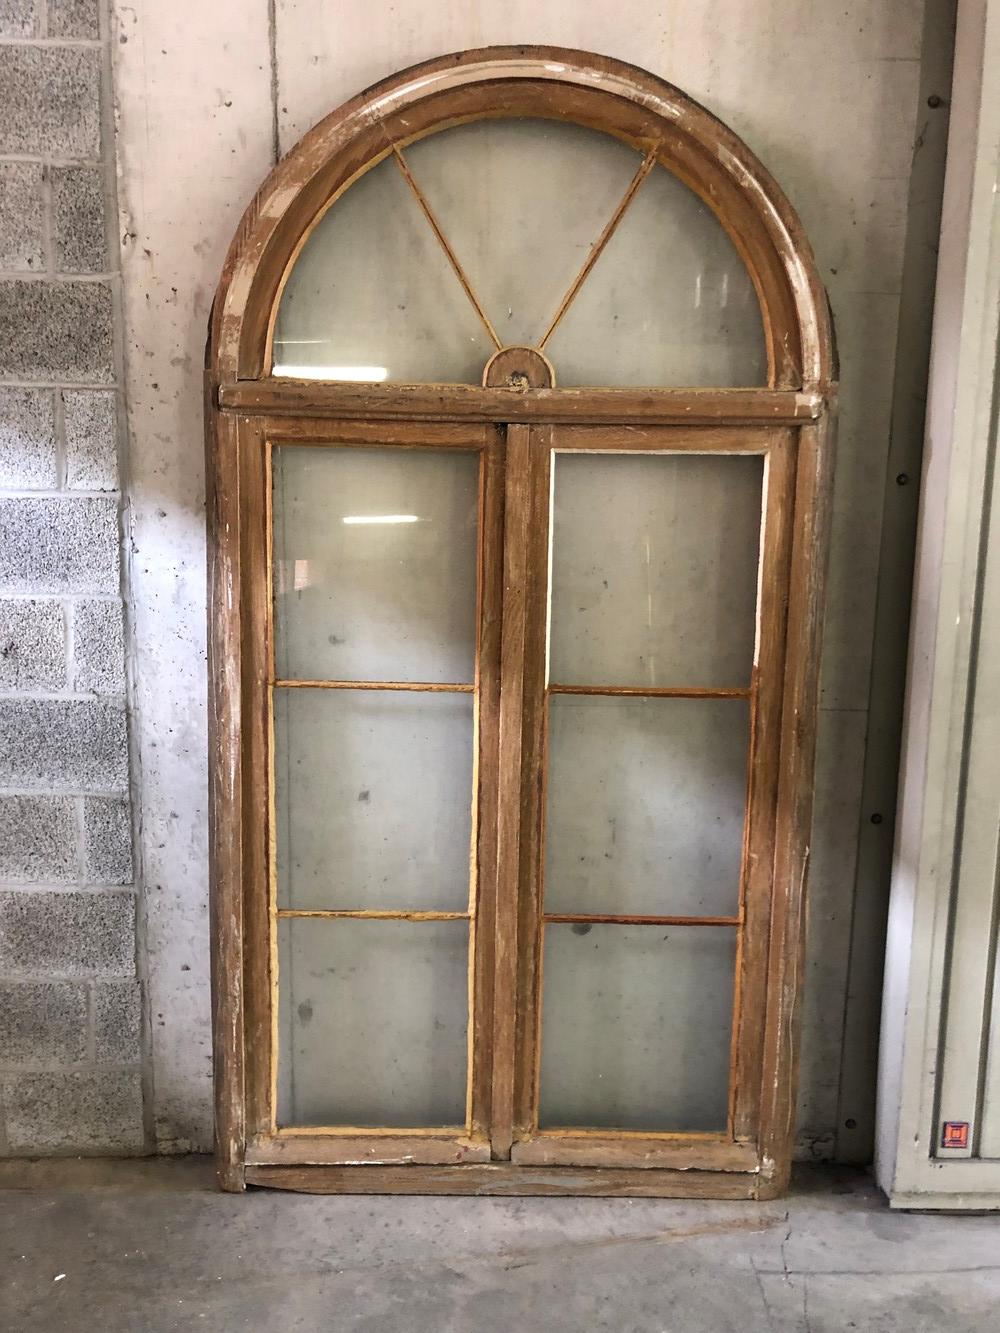  window with rounded head